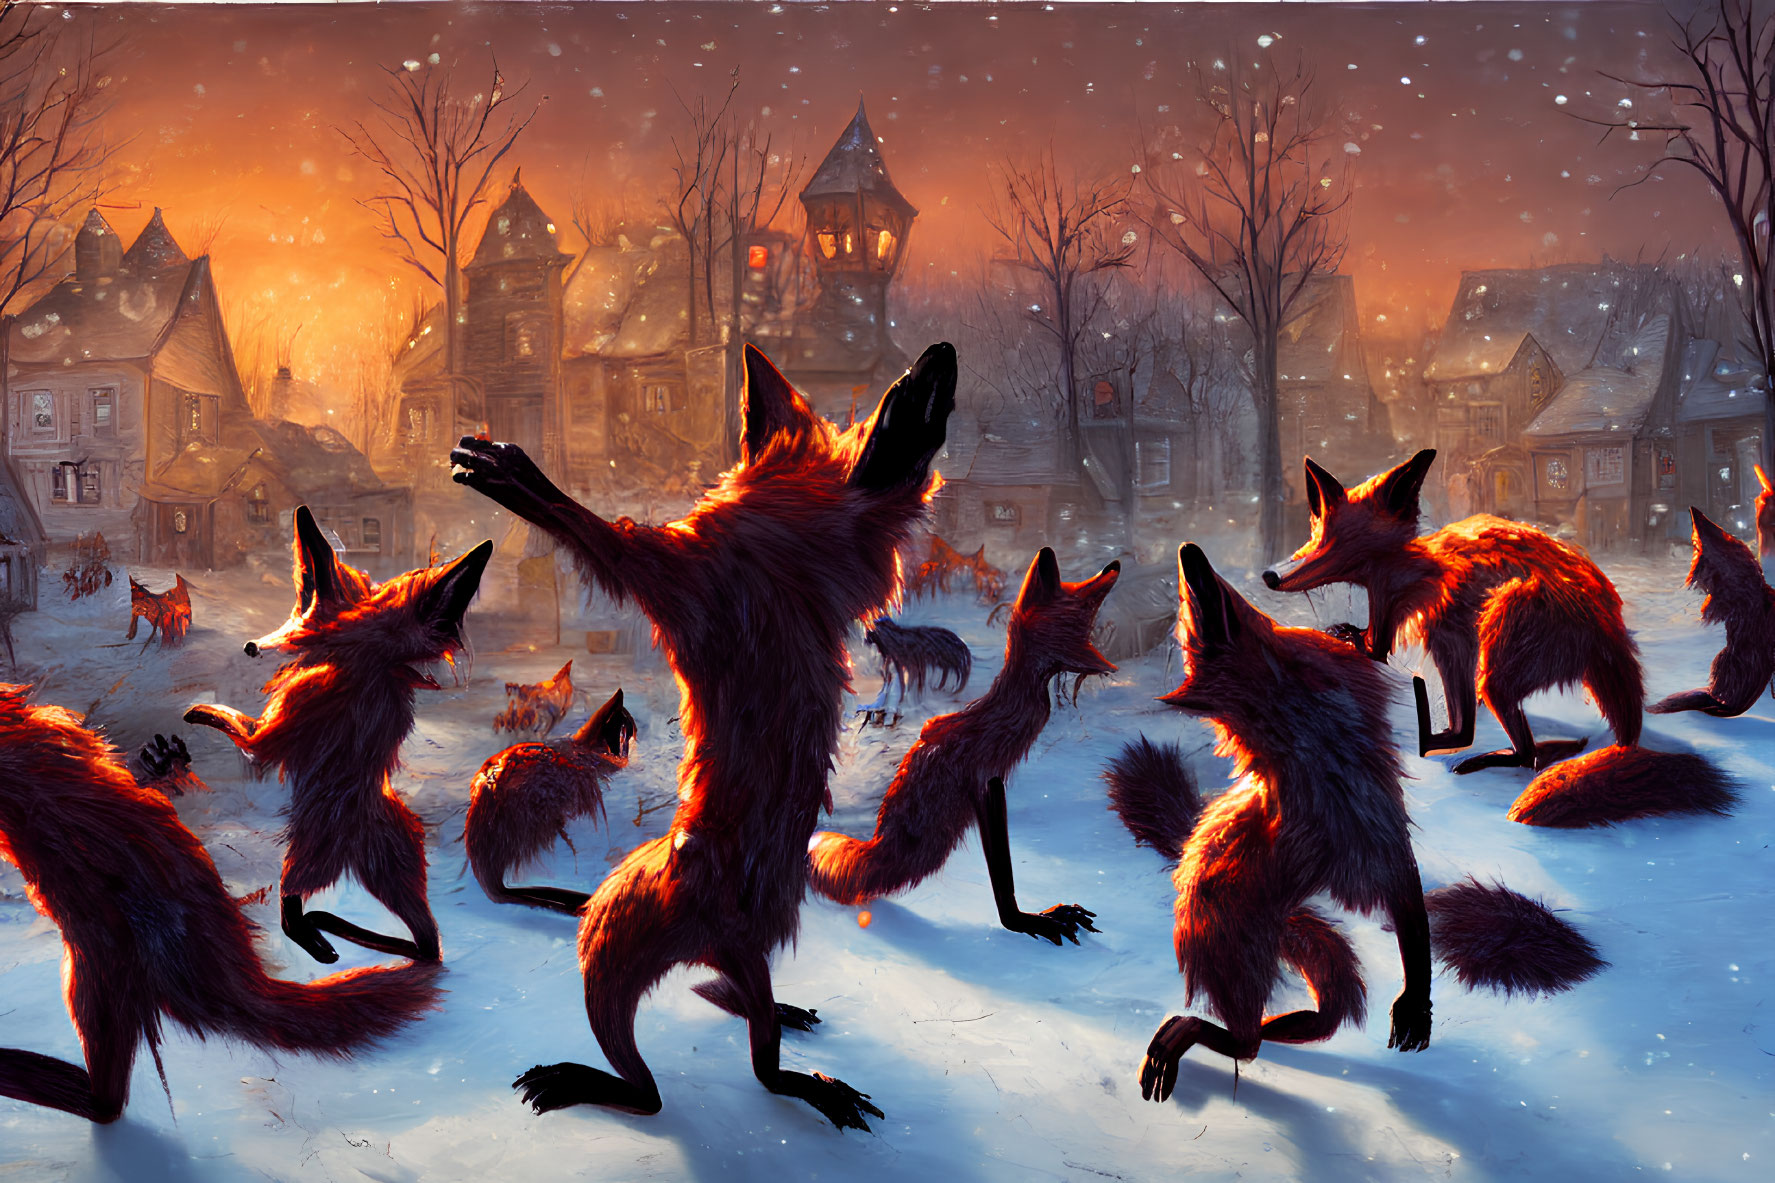 Anthropomorphic foxes dancing in snow-covered village at dusk